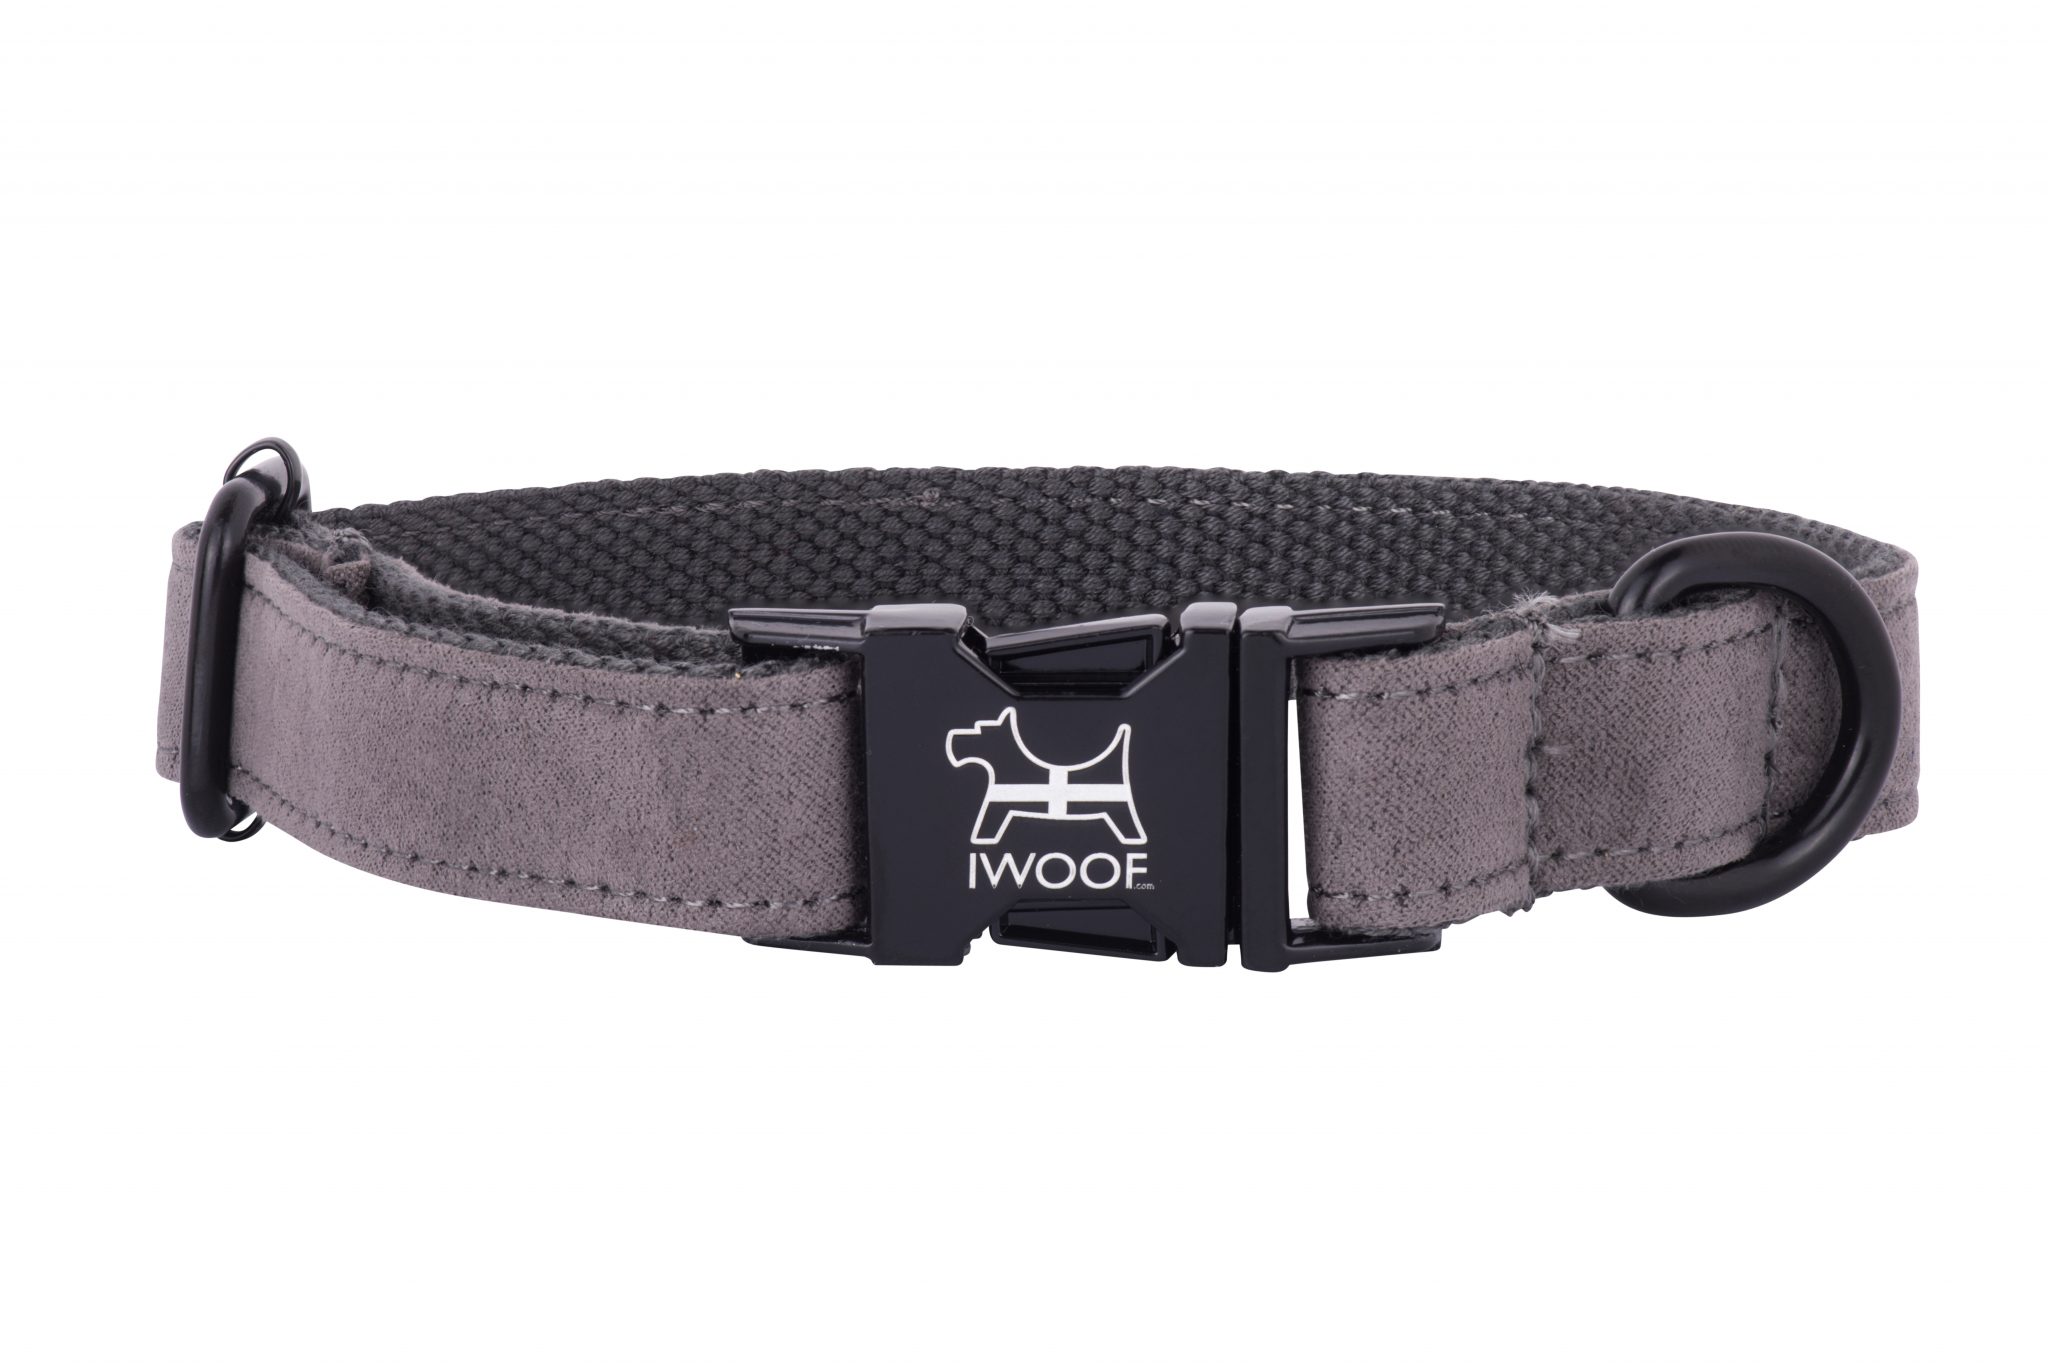 Dolphin designer dog collar by IWOOF with black fittings and Cornish flag